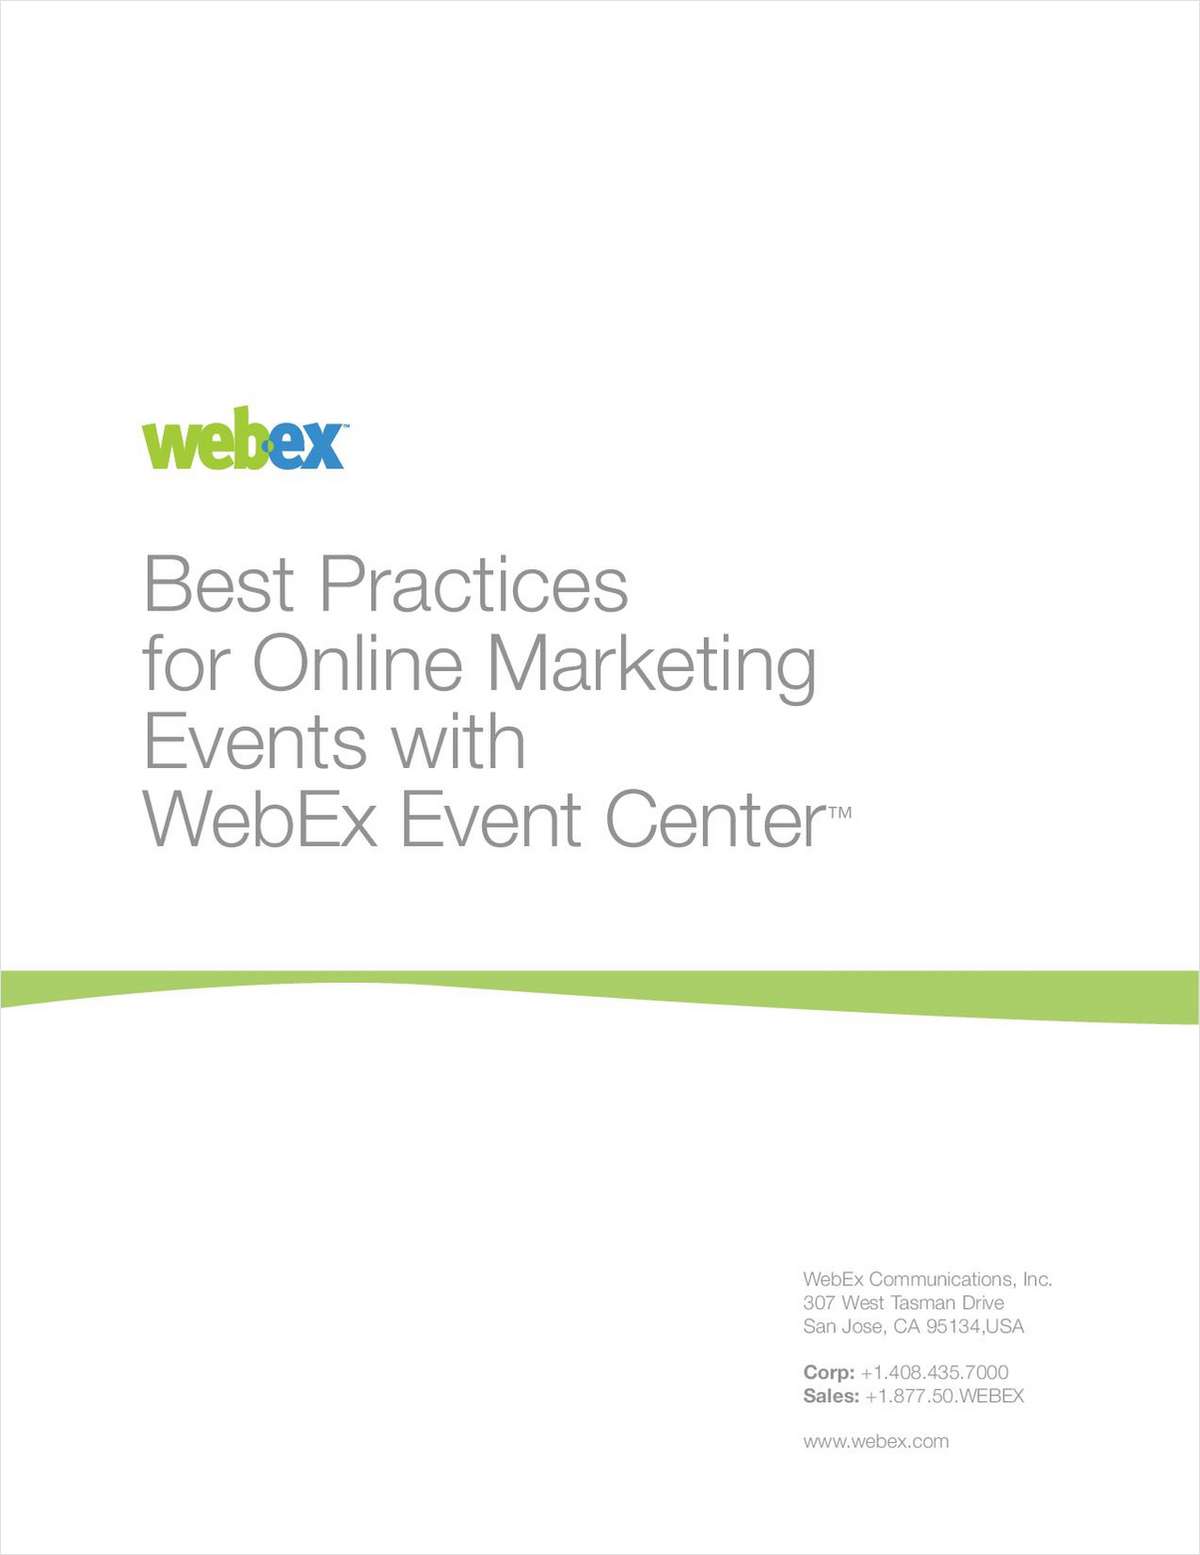 Best Practices for Online Marketing Events with WebEx Events Center